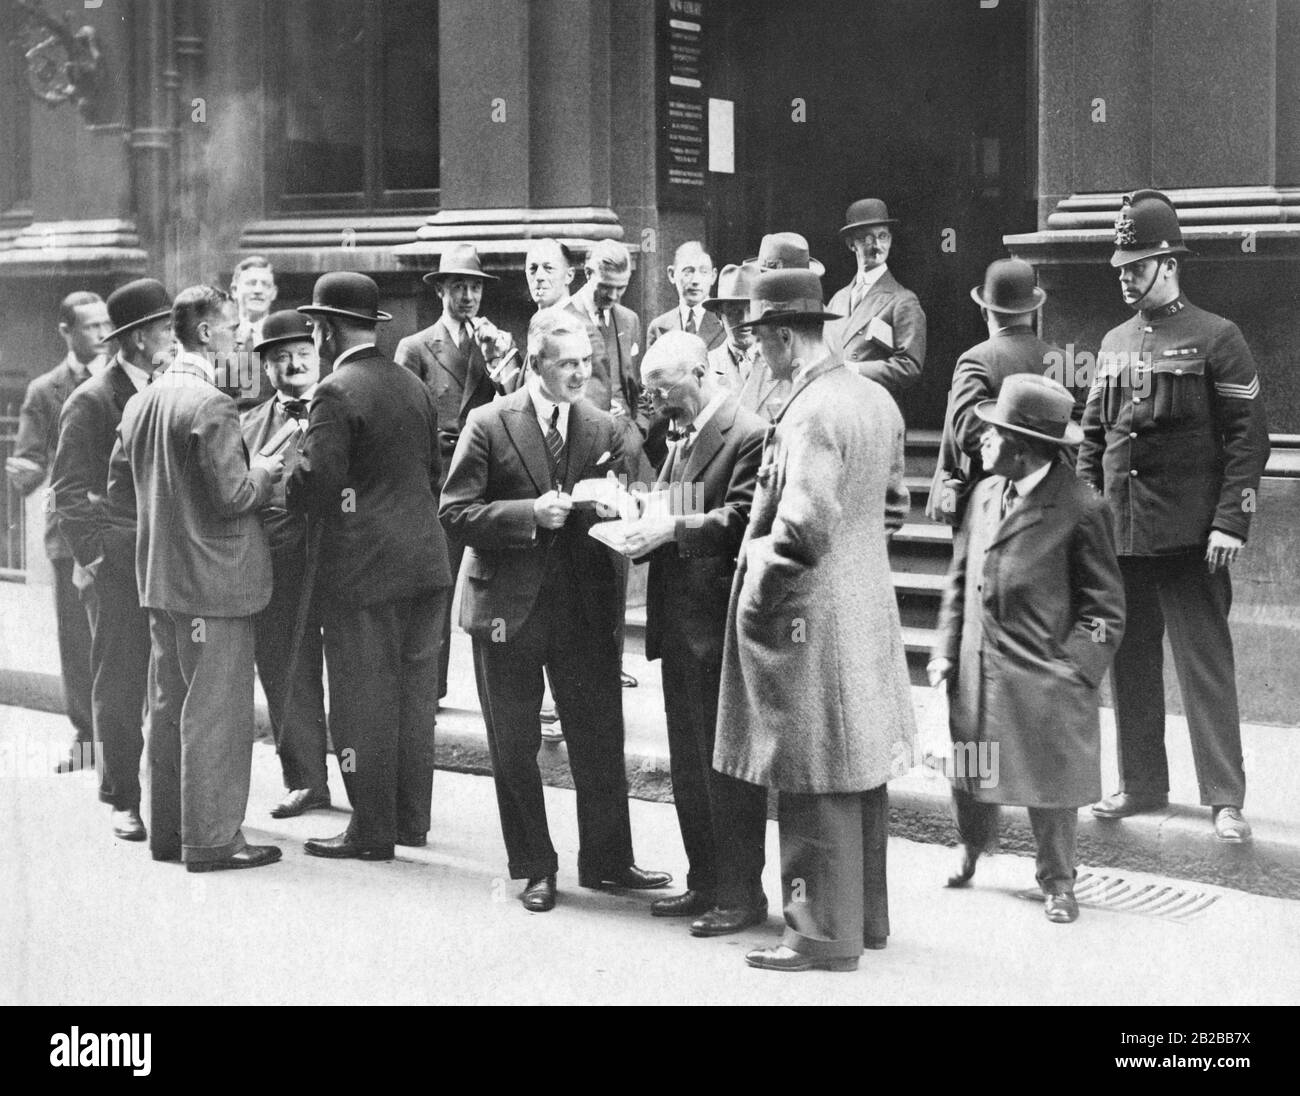 The Great Depression in Great Britain: People talking in front of the stock exchange (The pound is being detached from the gold standard). Stock Photo